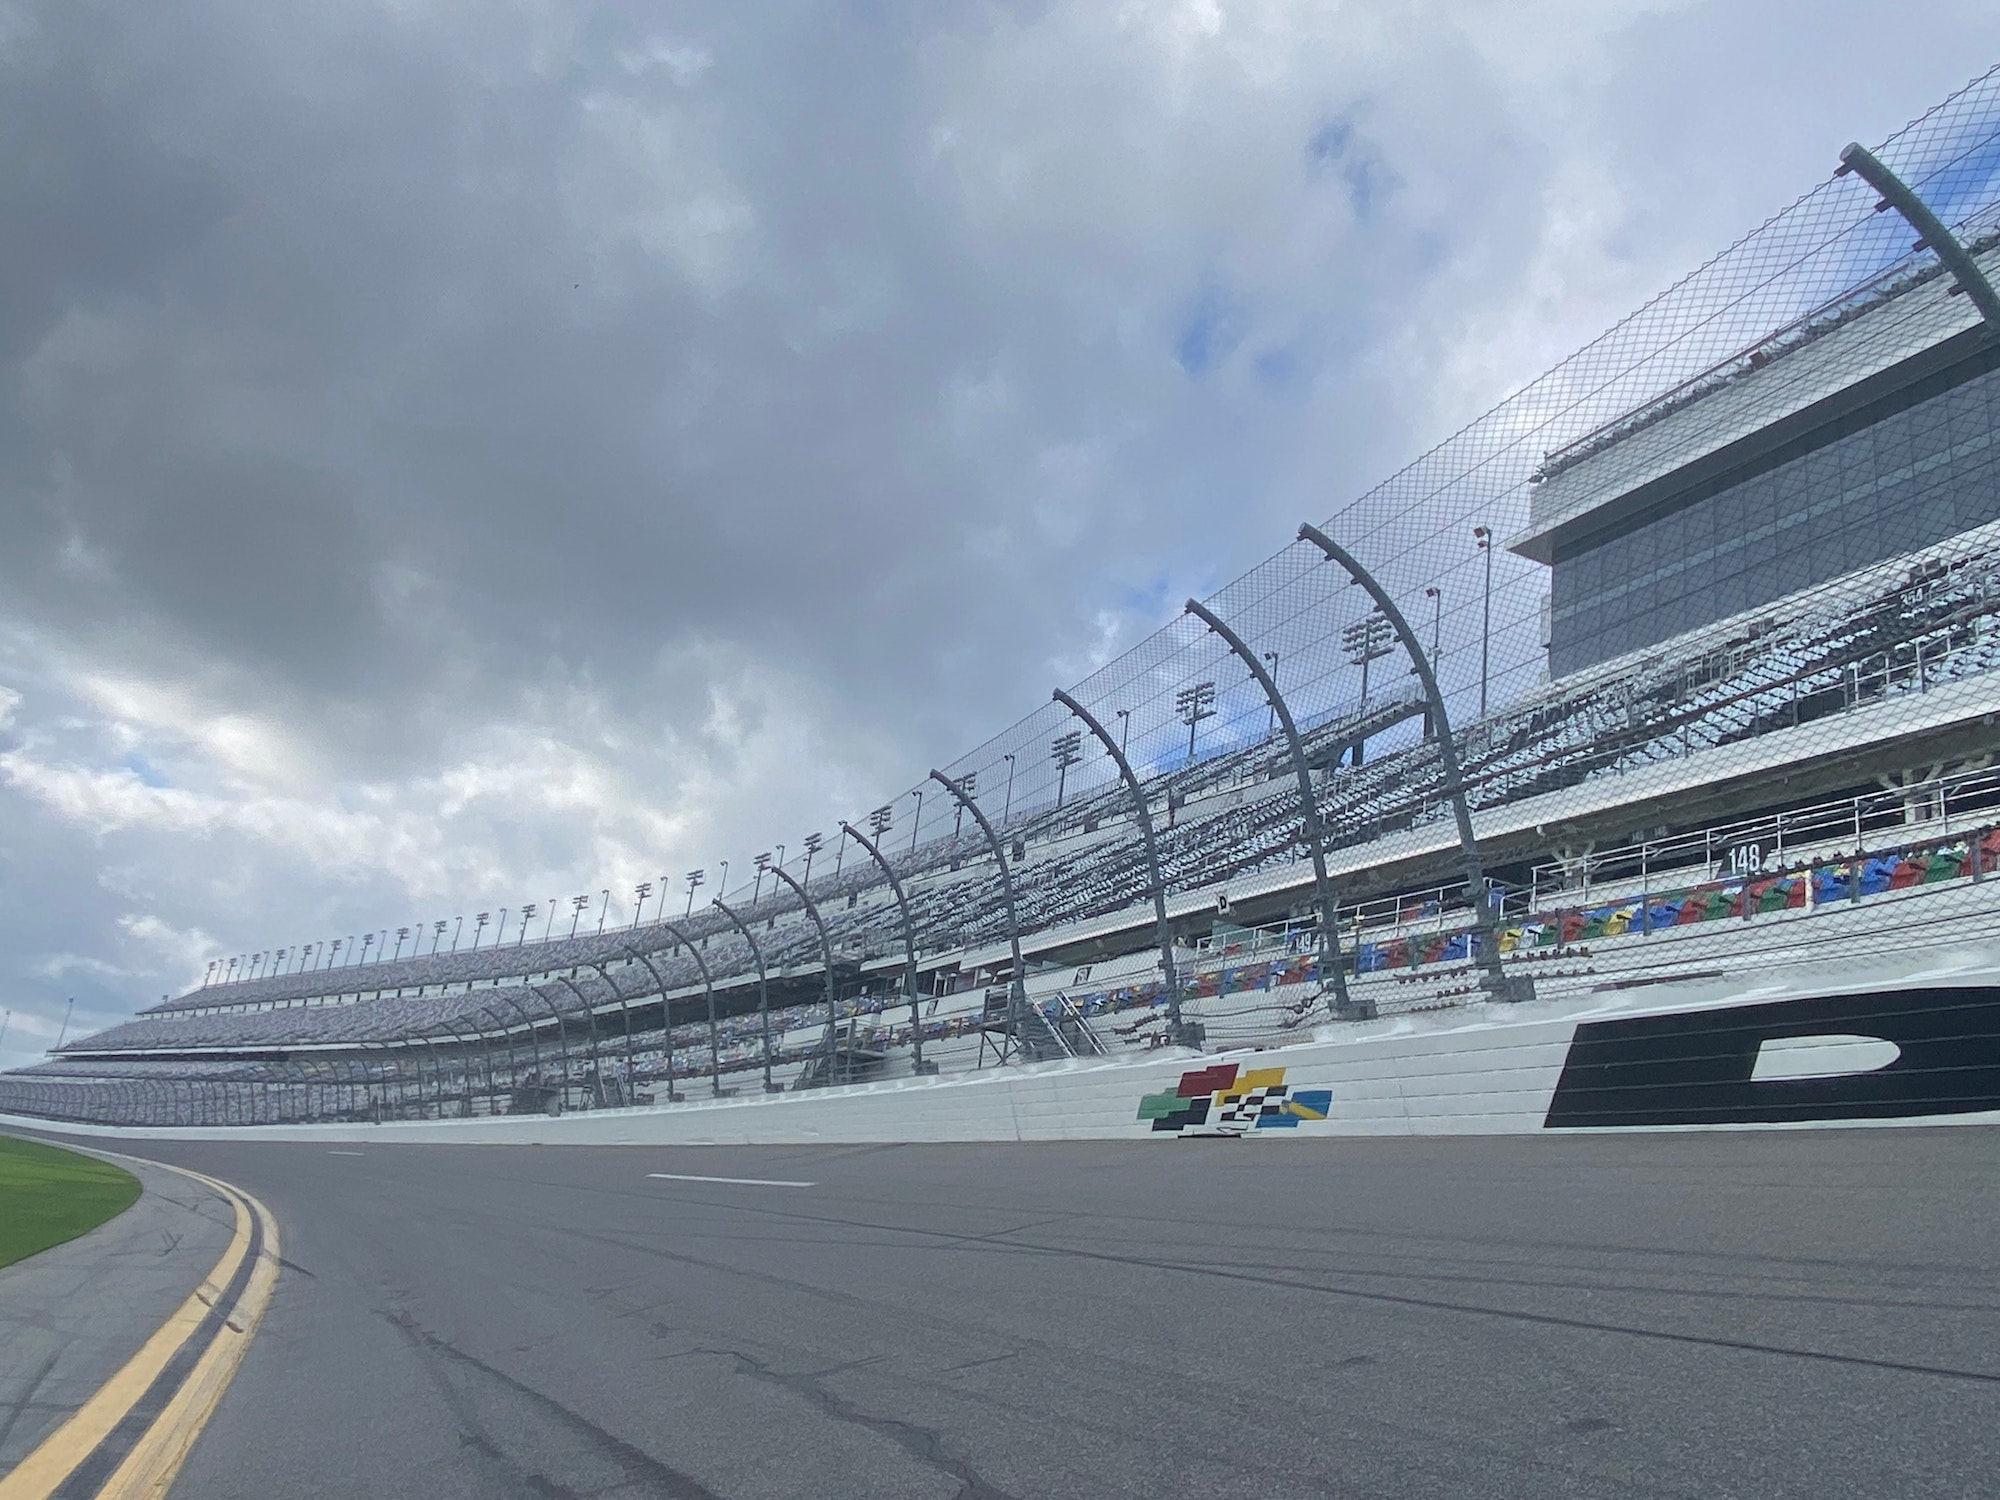 The empty track of the Daytona speedway on a cloudy day